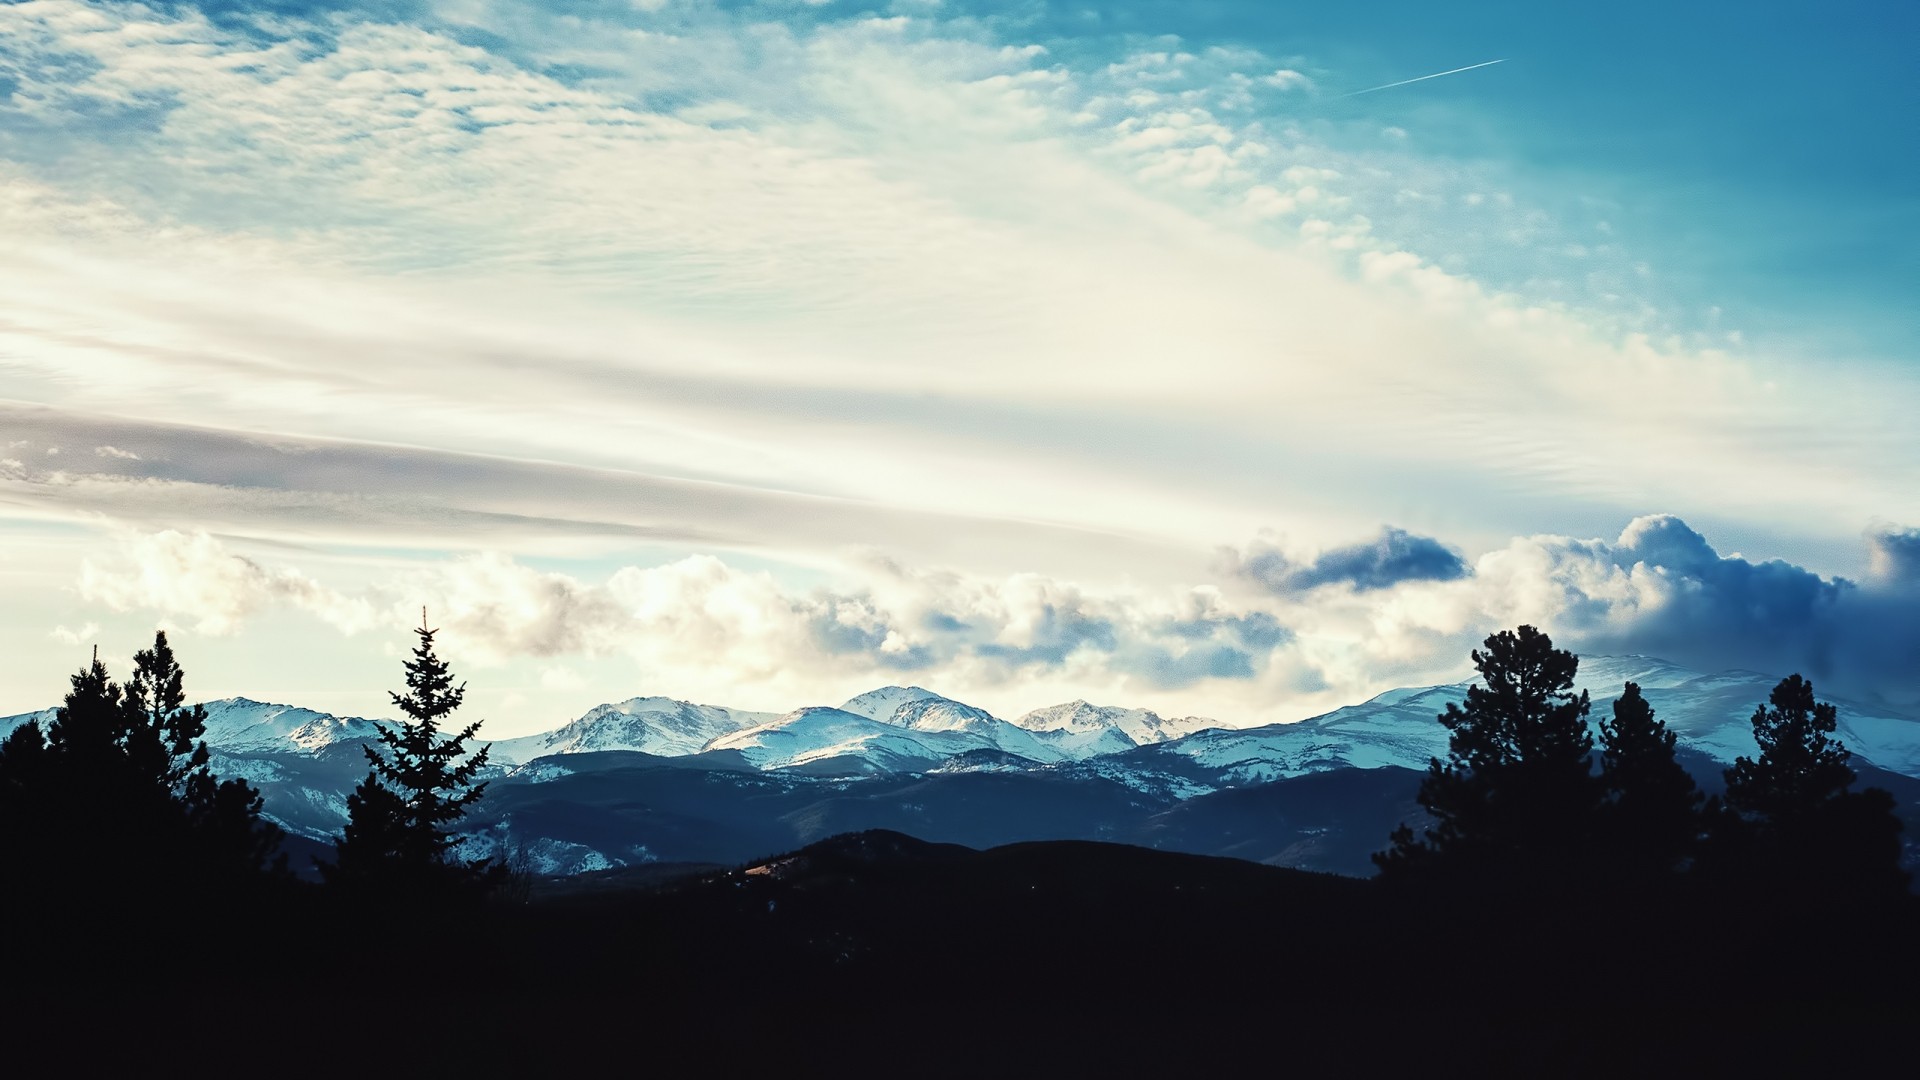 General 1920x1080 nature landscape trees clouds mountains photography hills silhouette snowy peak